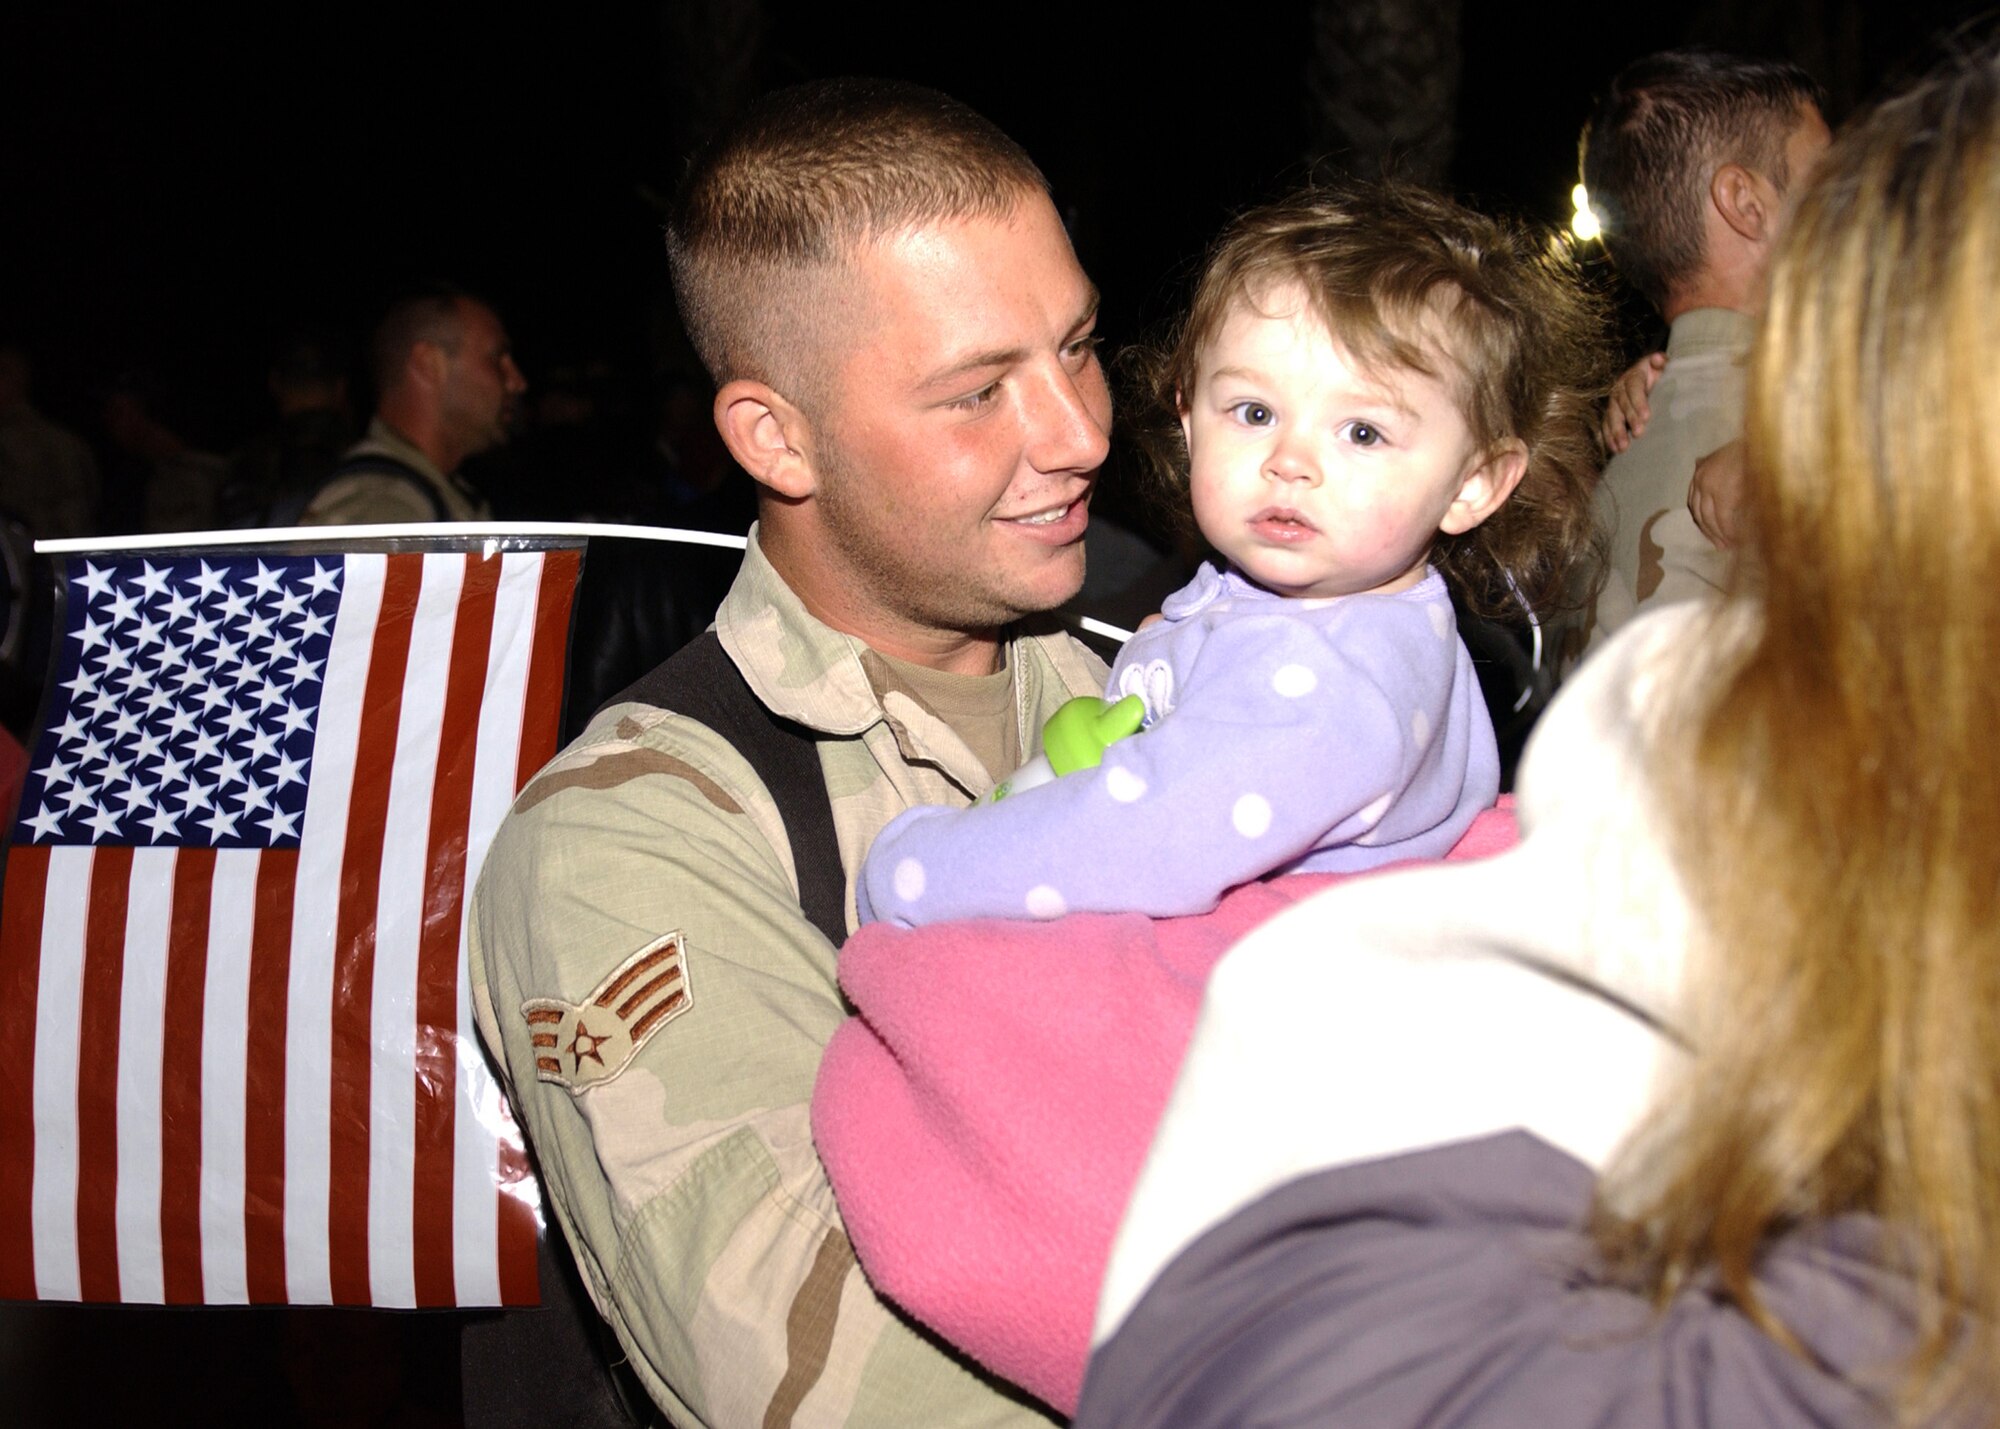 Senior Airman Ryan Phillips, 30th Civil Engineer Squadron,  reunites with his loved ones after landing on the Vandenberg flightline on December 7, 2006. Airman Phillips was one of 39 CE troops to return from deployment in support of the Global War on Terror. (U.S. Air Force photo by Airman 1st Class Christopher Hubenthal)                               